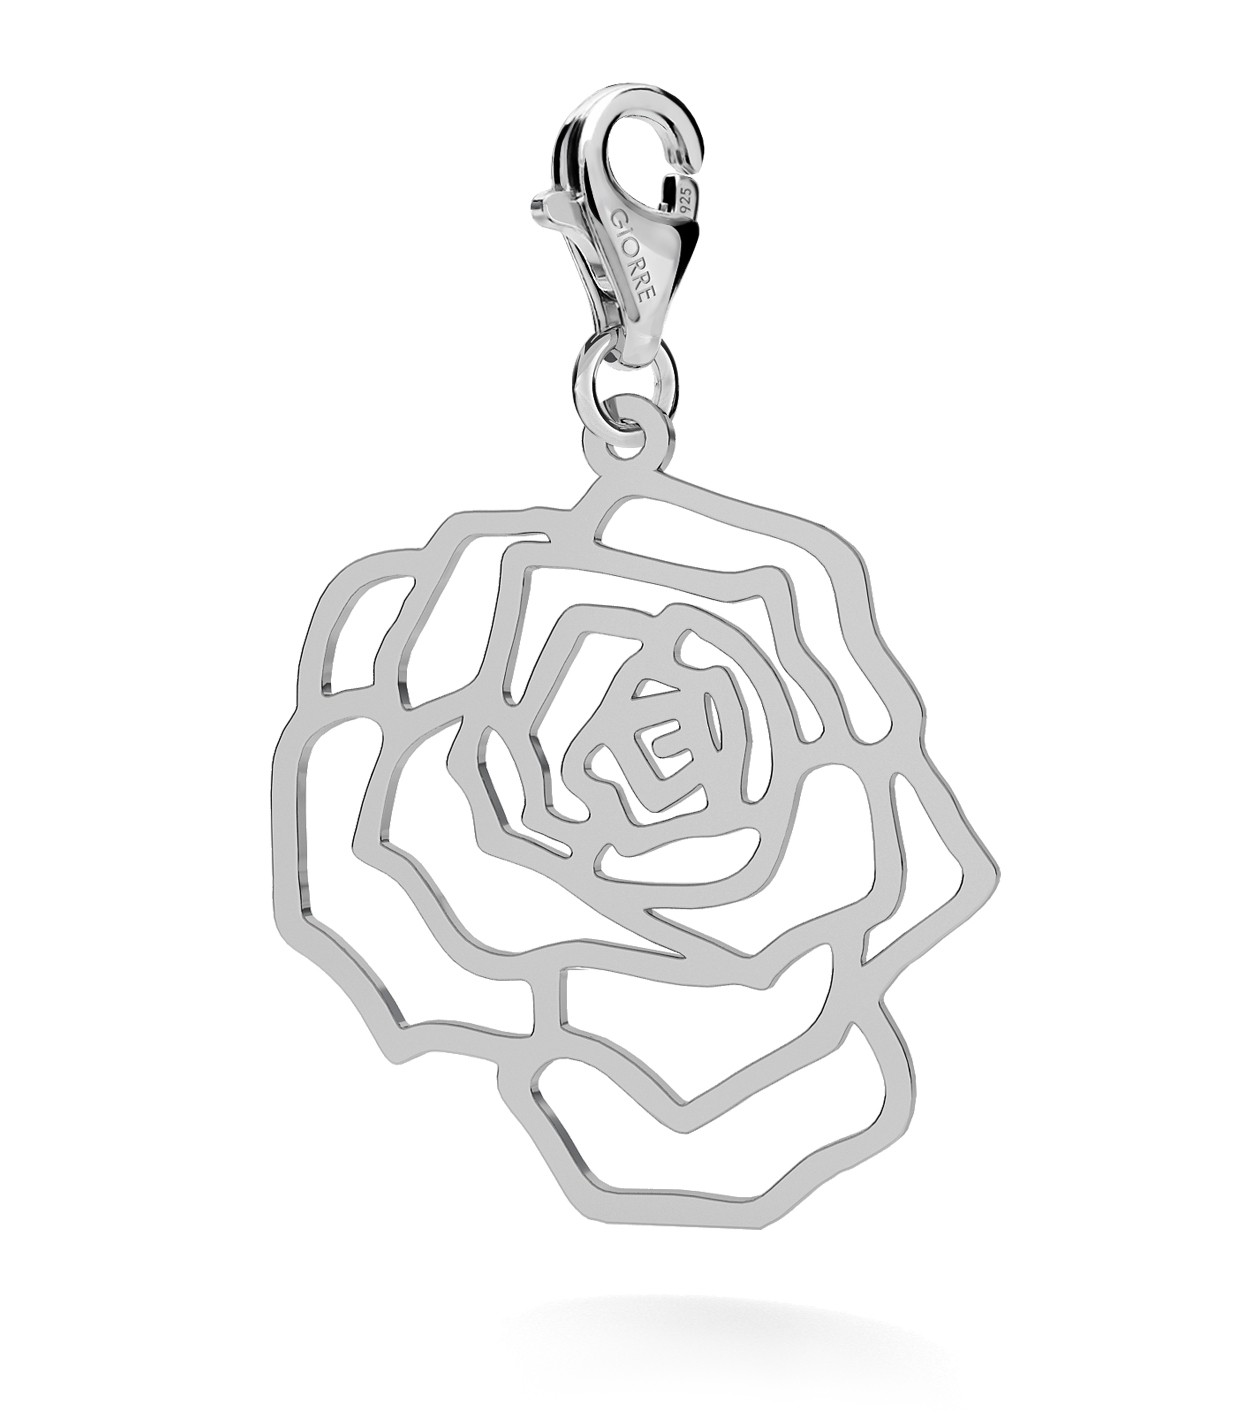 CHARM 111, ROSE, STERLING SILVER (925) RHODIUM OR GOLD PLATED